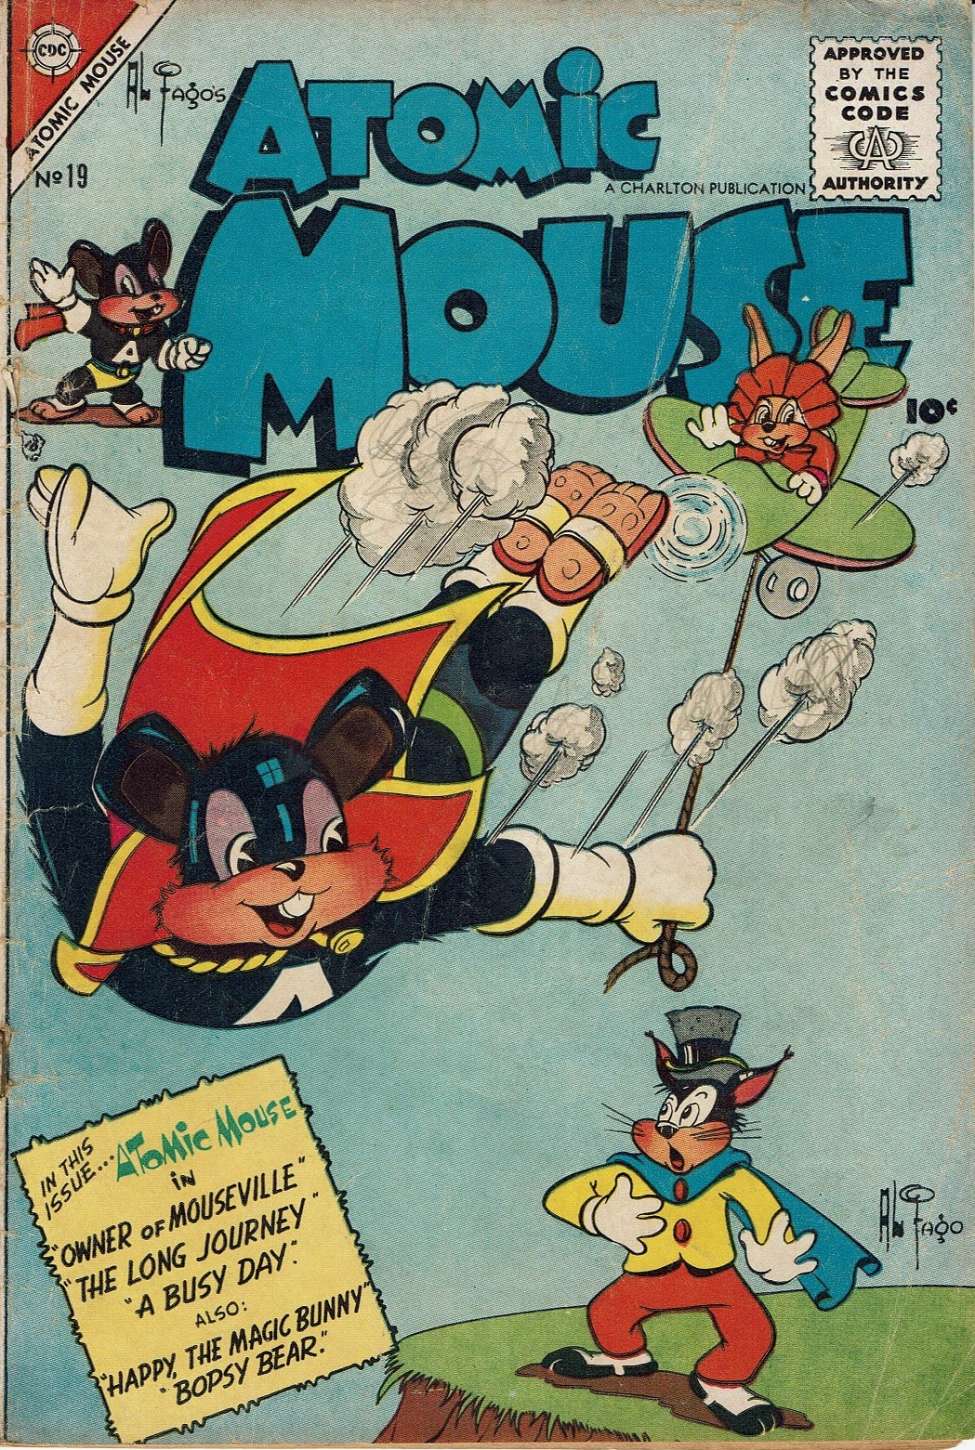 Book Cover For Atomic Mouse 19